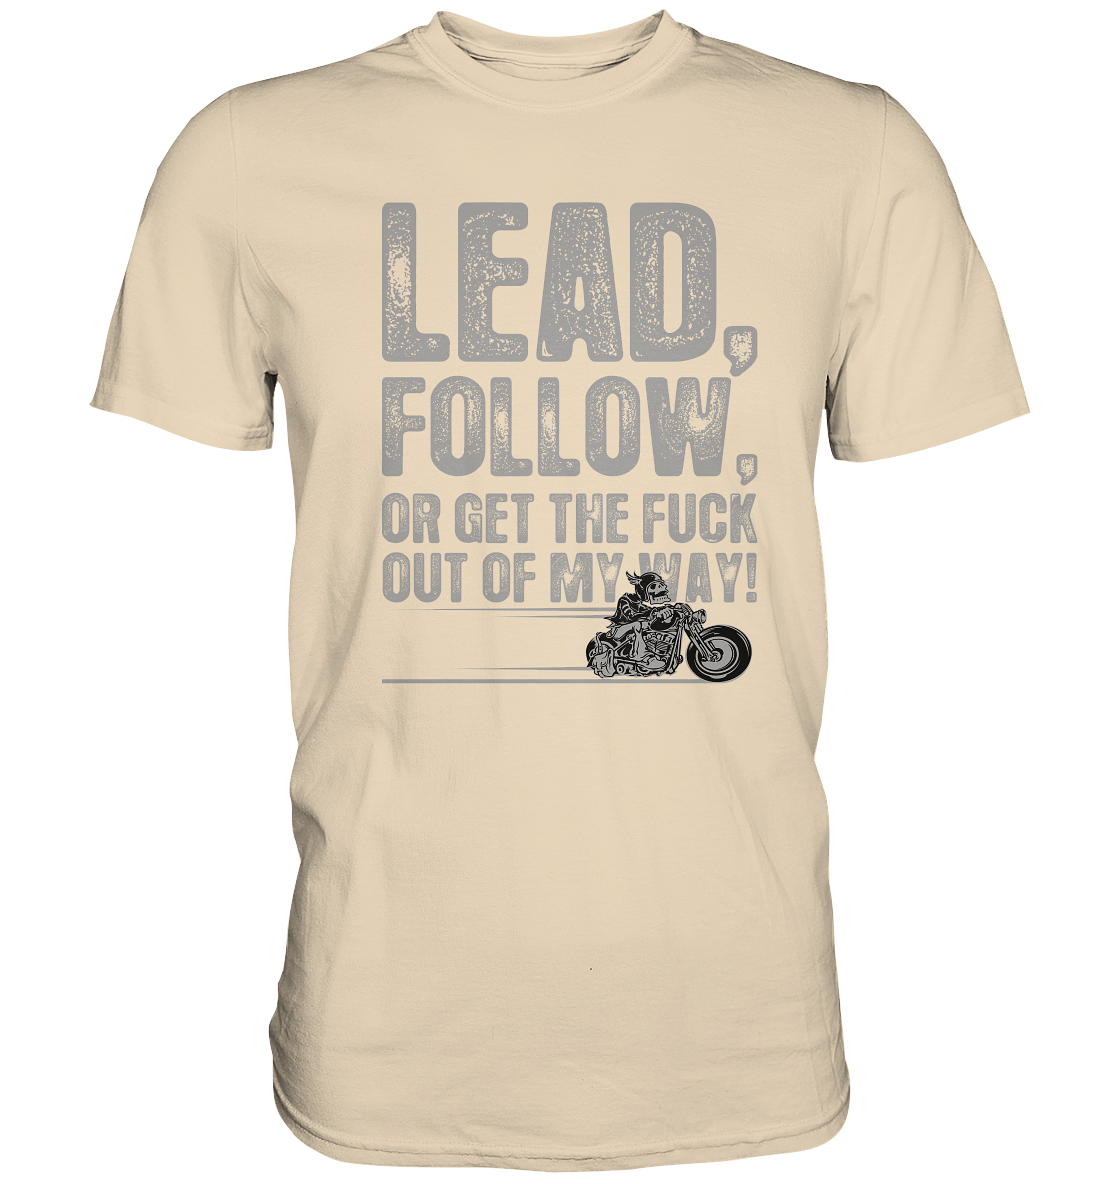 Lead, follow, or get the fuck out of my way - Premium unisex Shirt